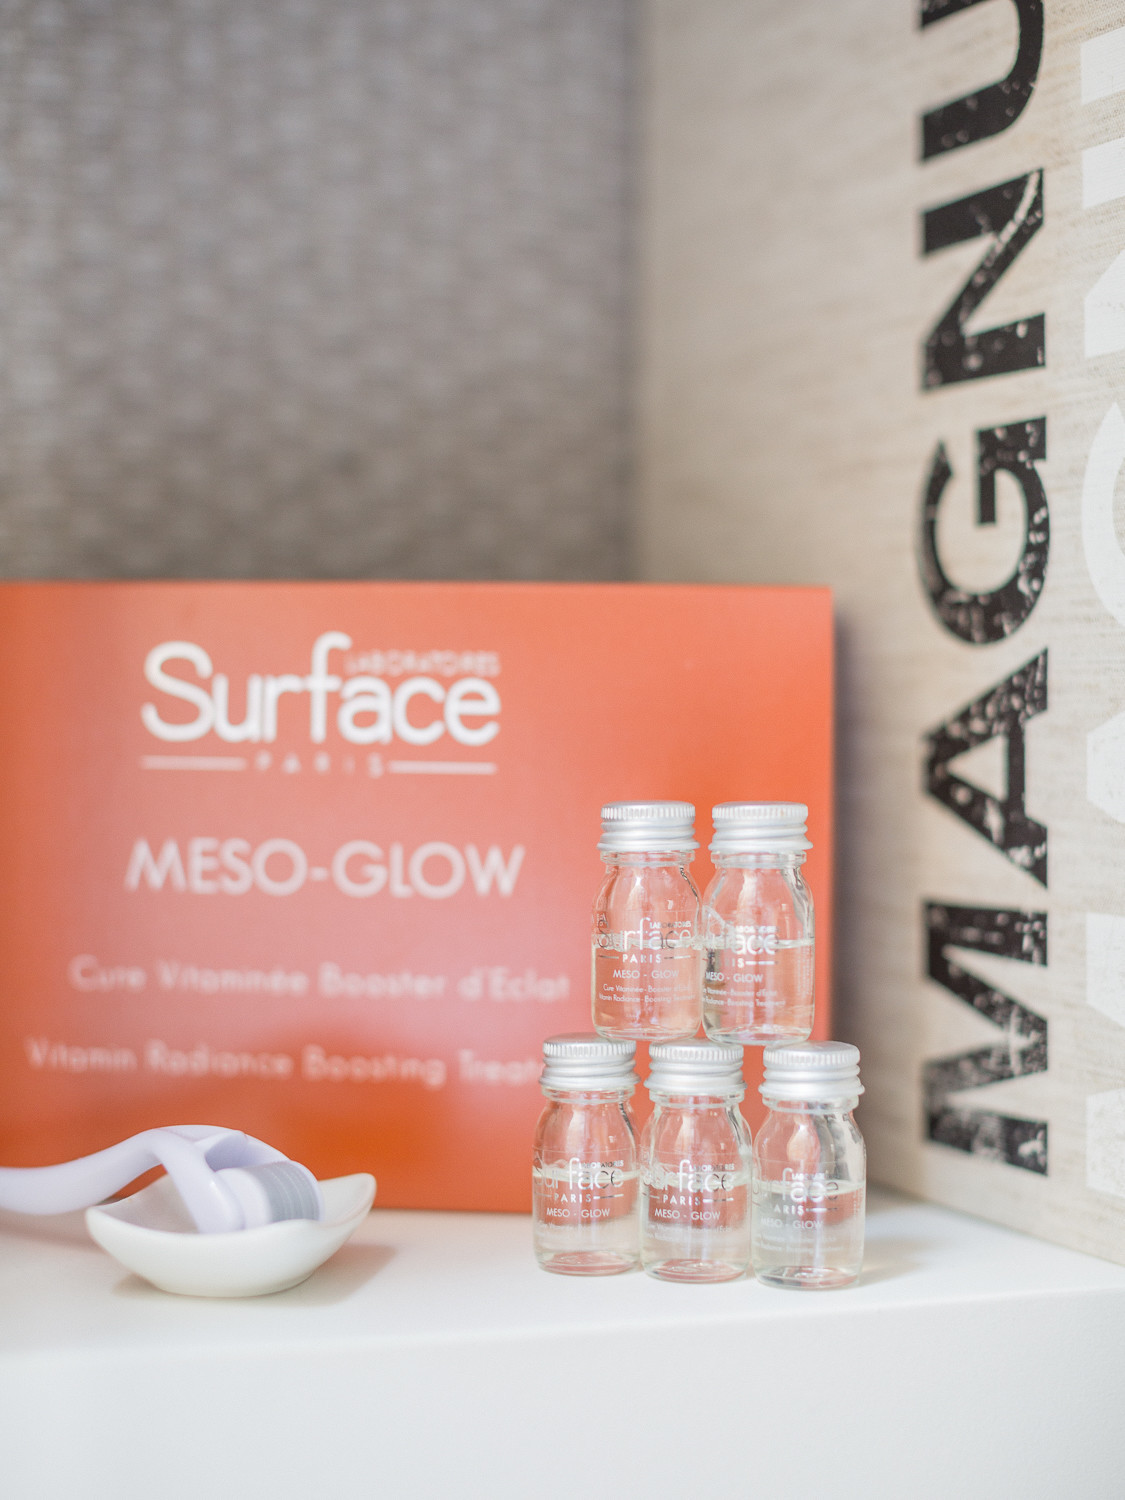 Surface Paris At Home Mesotherapy Meso Glow